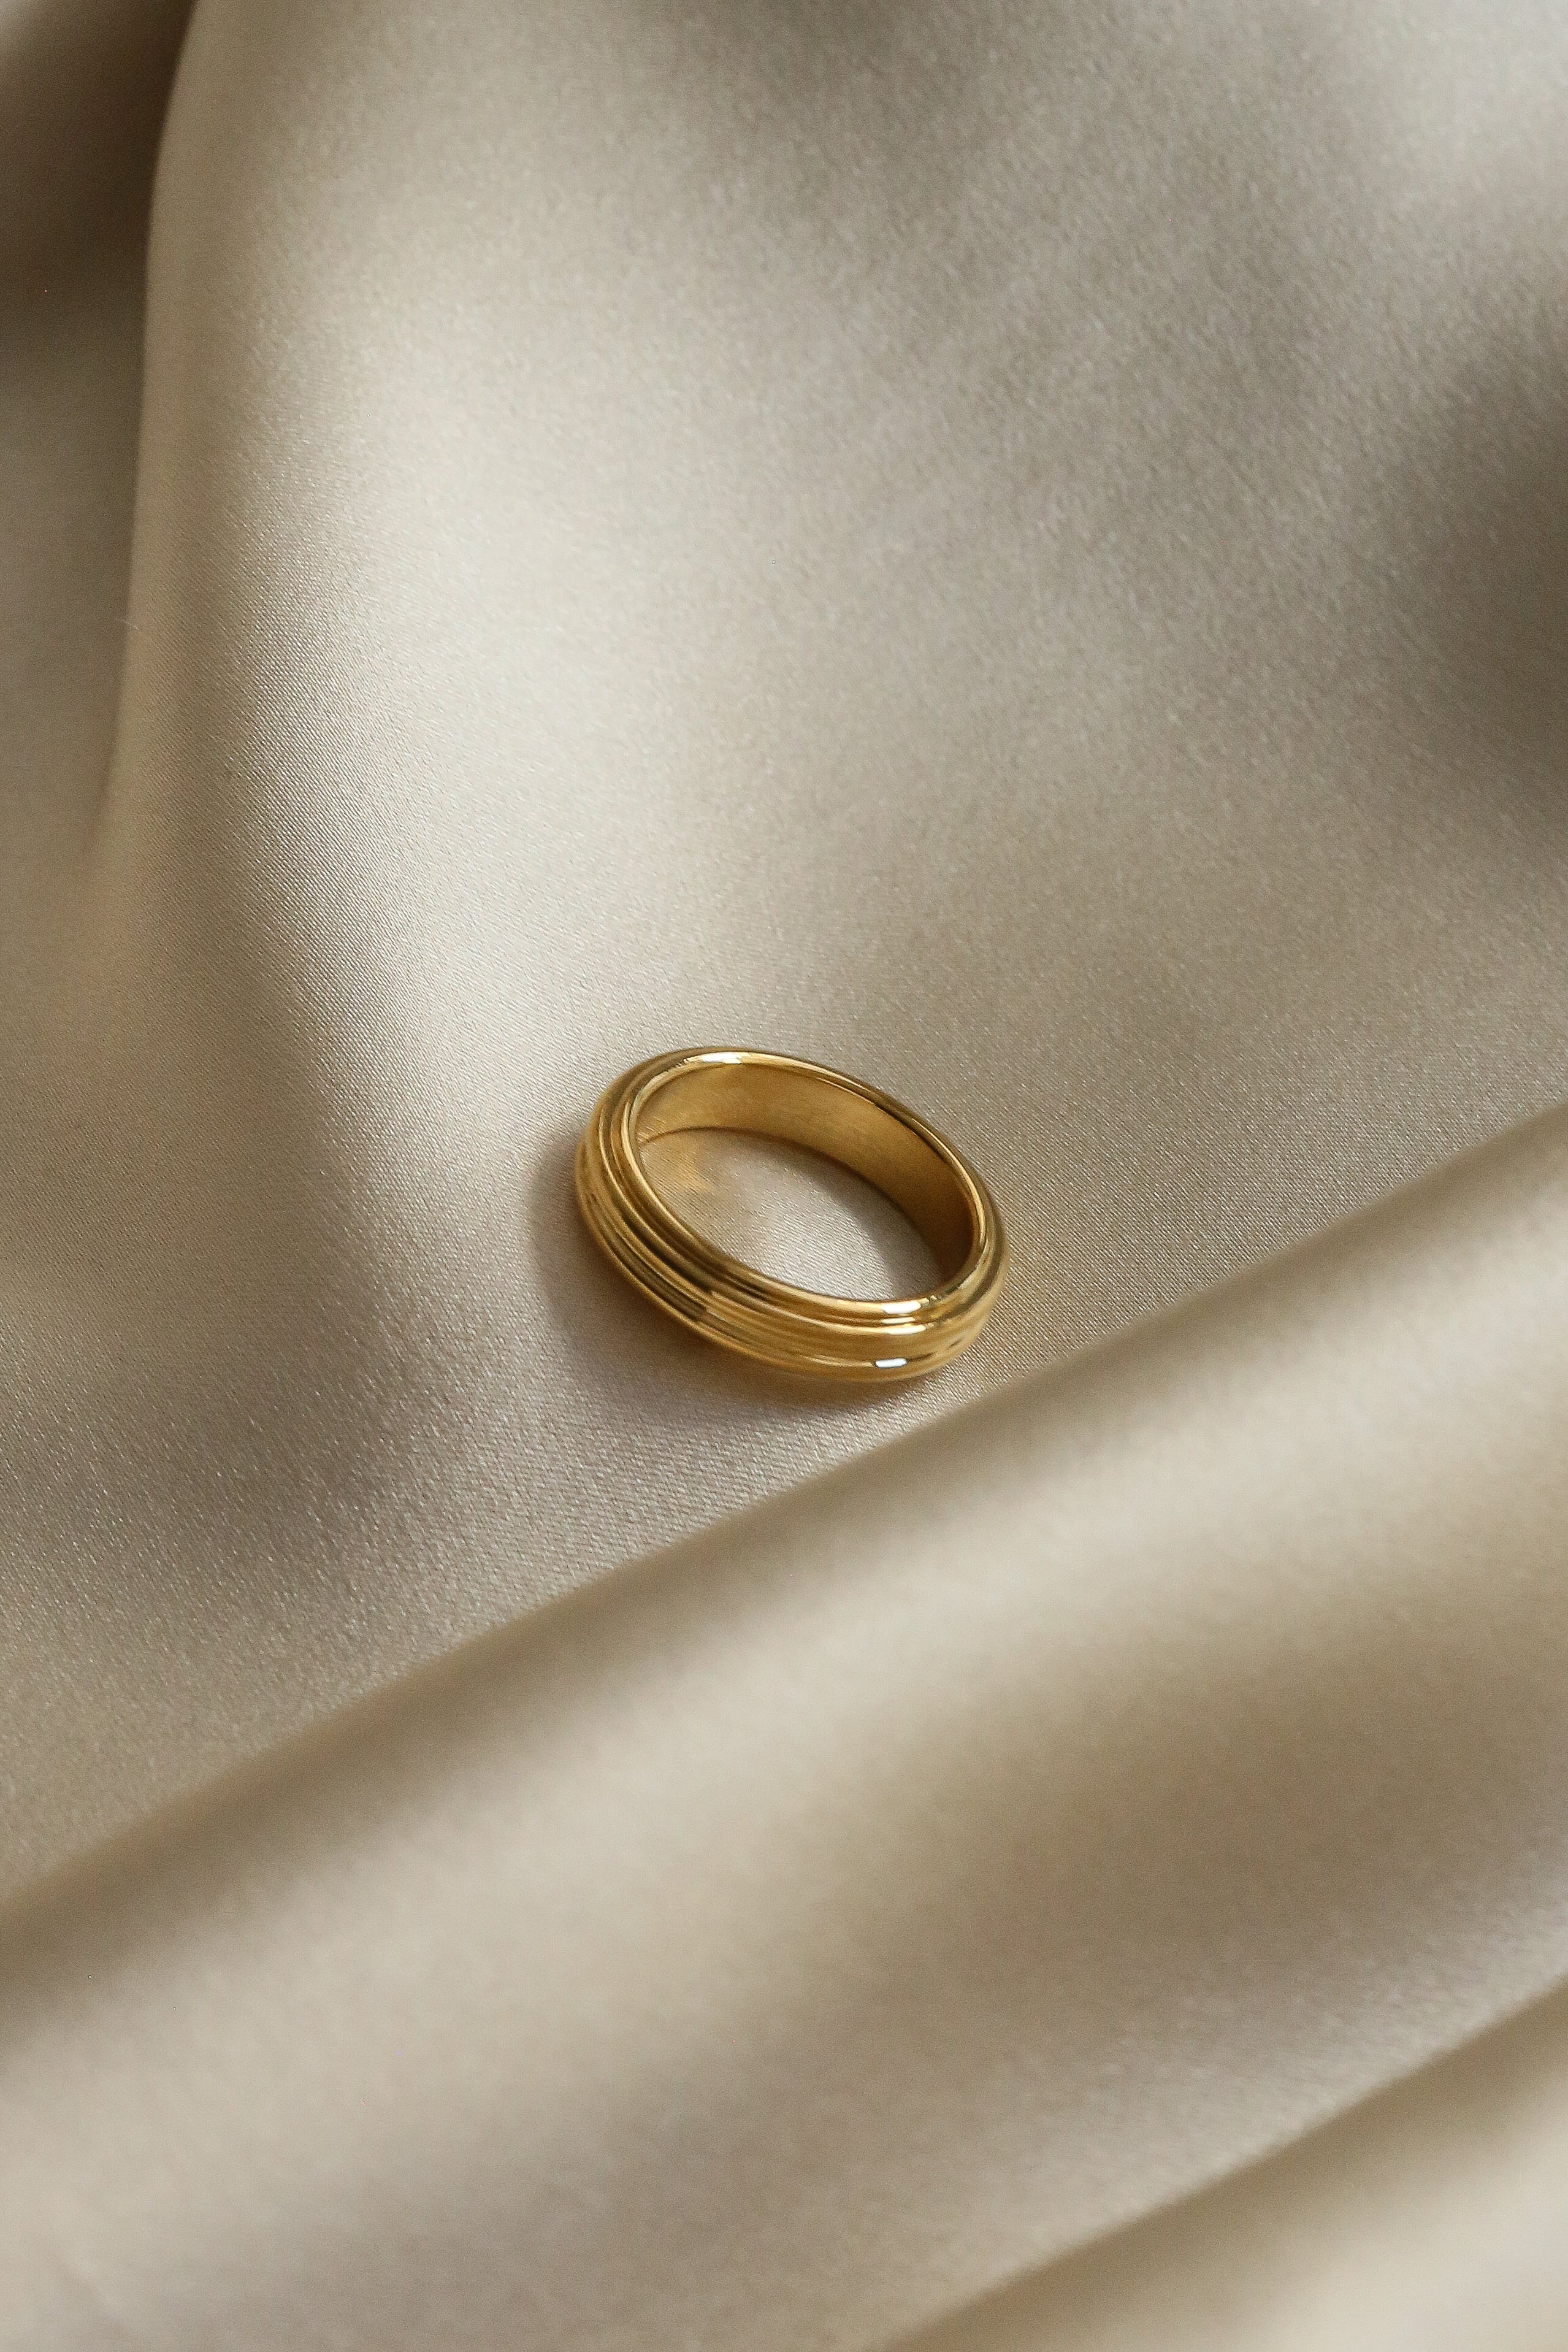 Ivy Ring - Boutique Minimaliste has waterproof, durable, elegant and vintage inspired jewelry